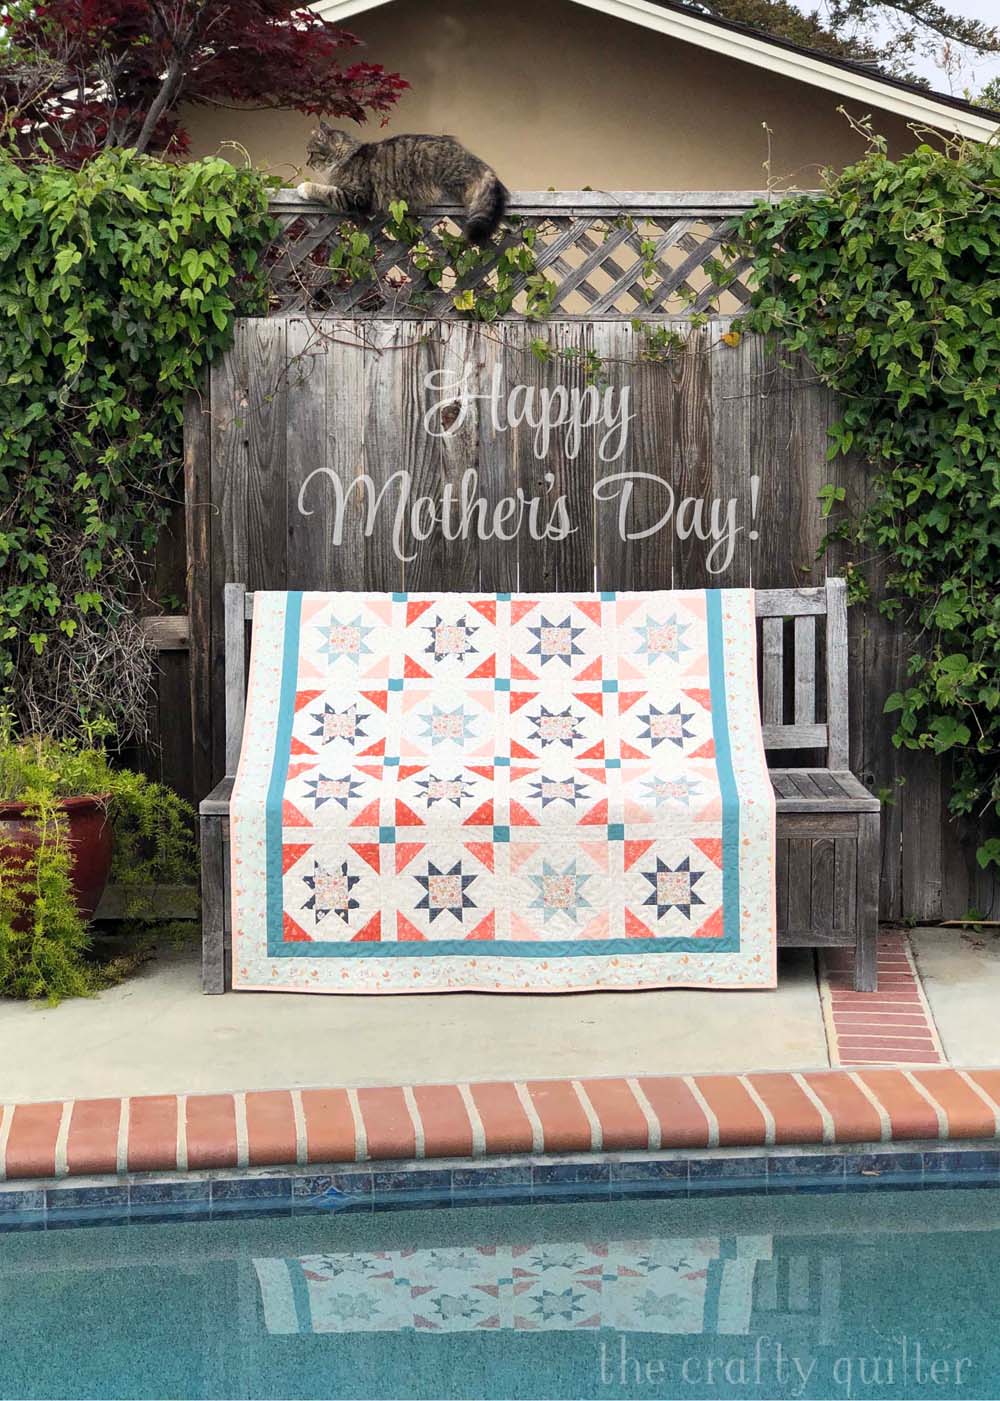 Treat yourself to the Sterling Quilt pattern this Mother's Day - @ The Crafty Quilter.